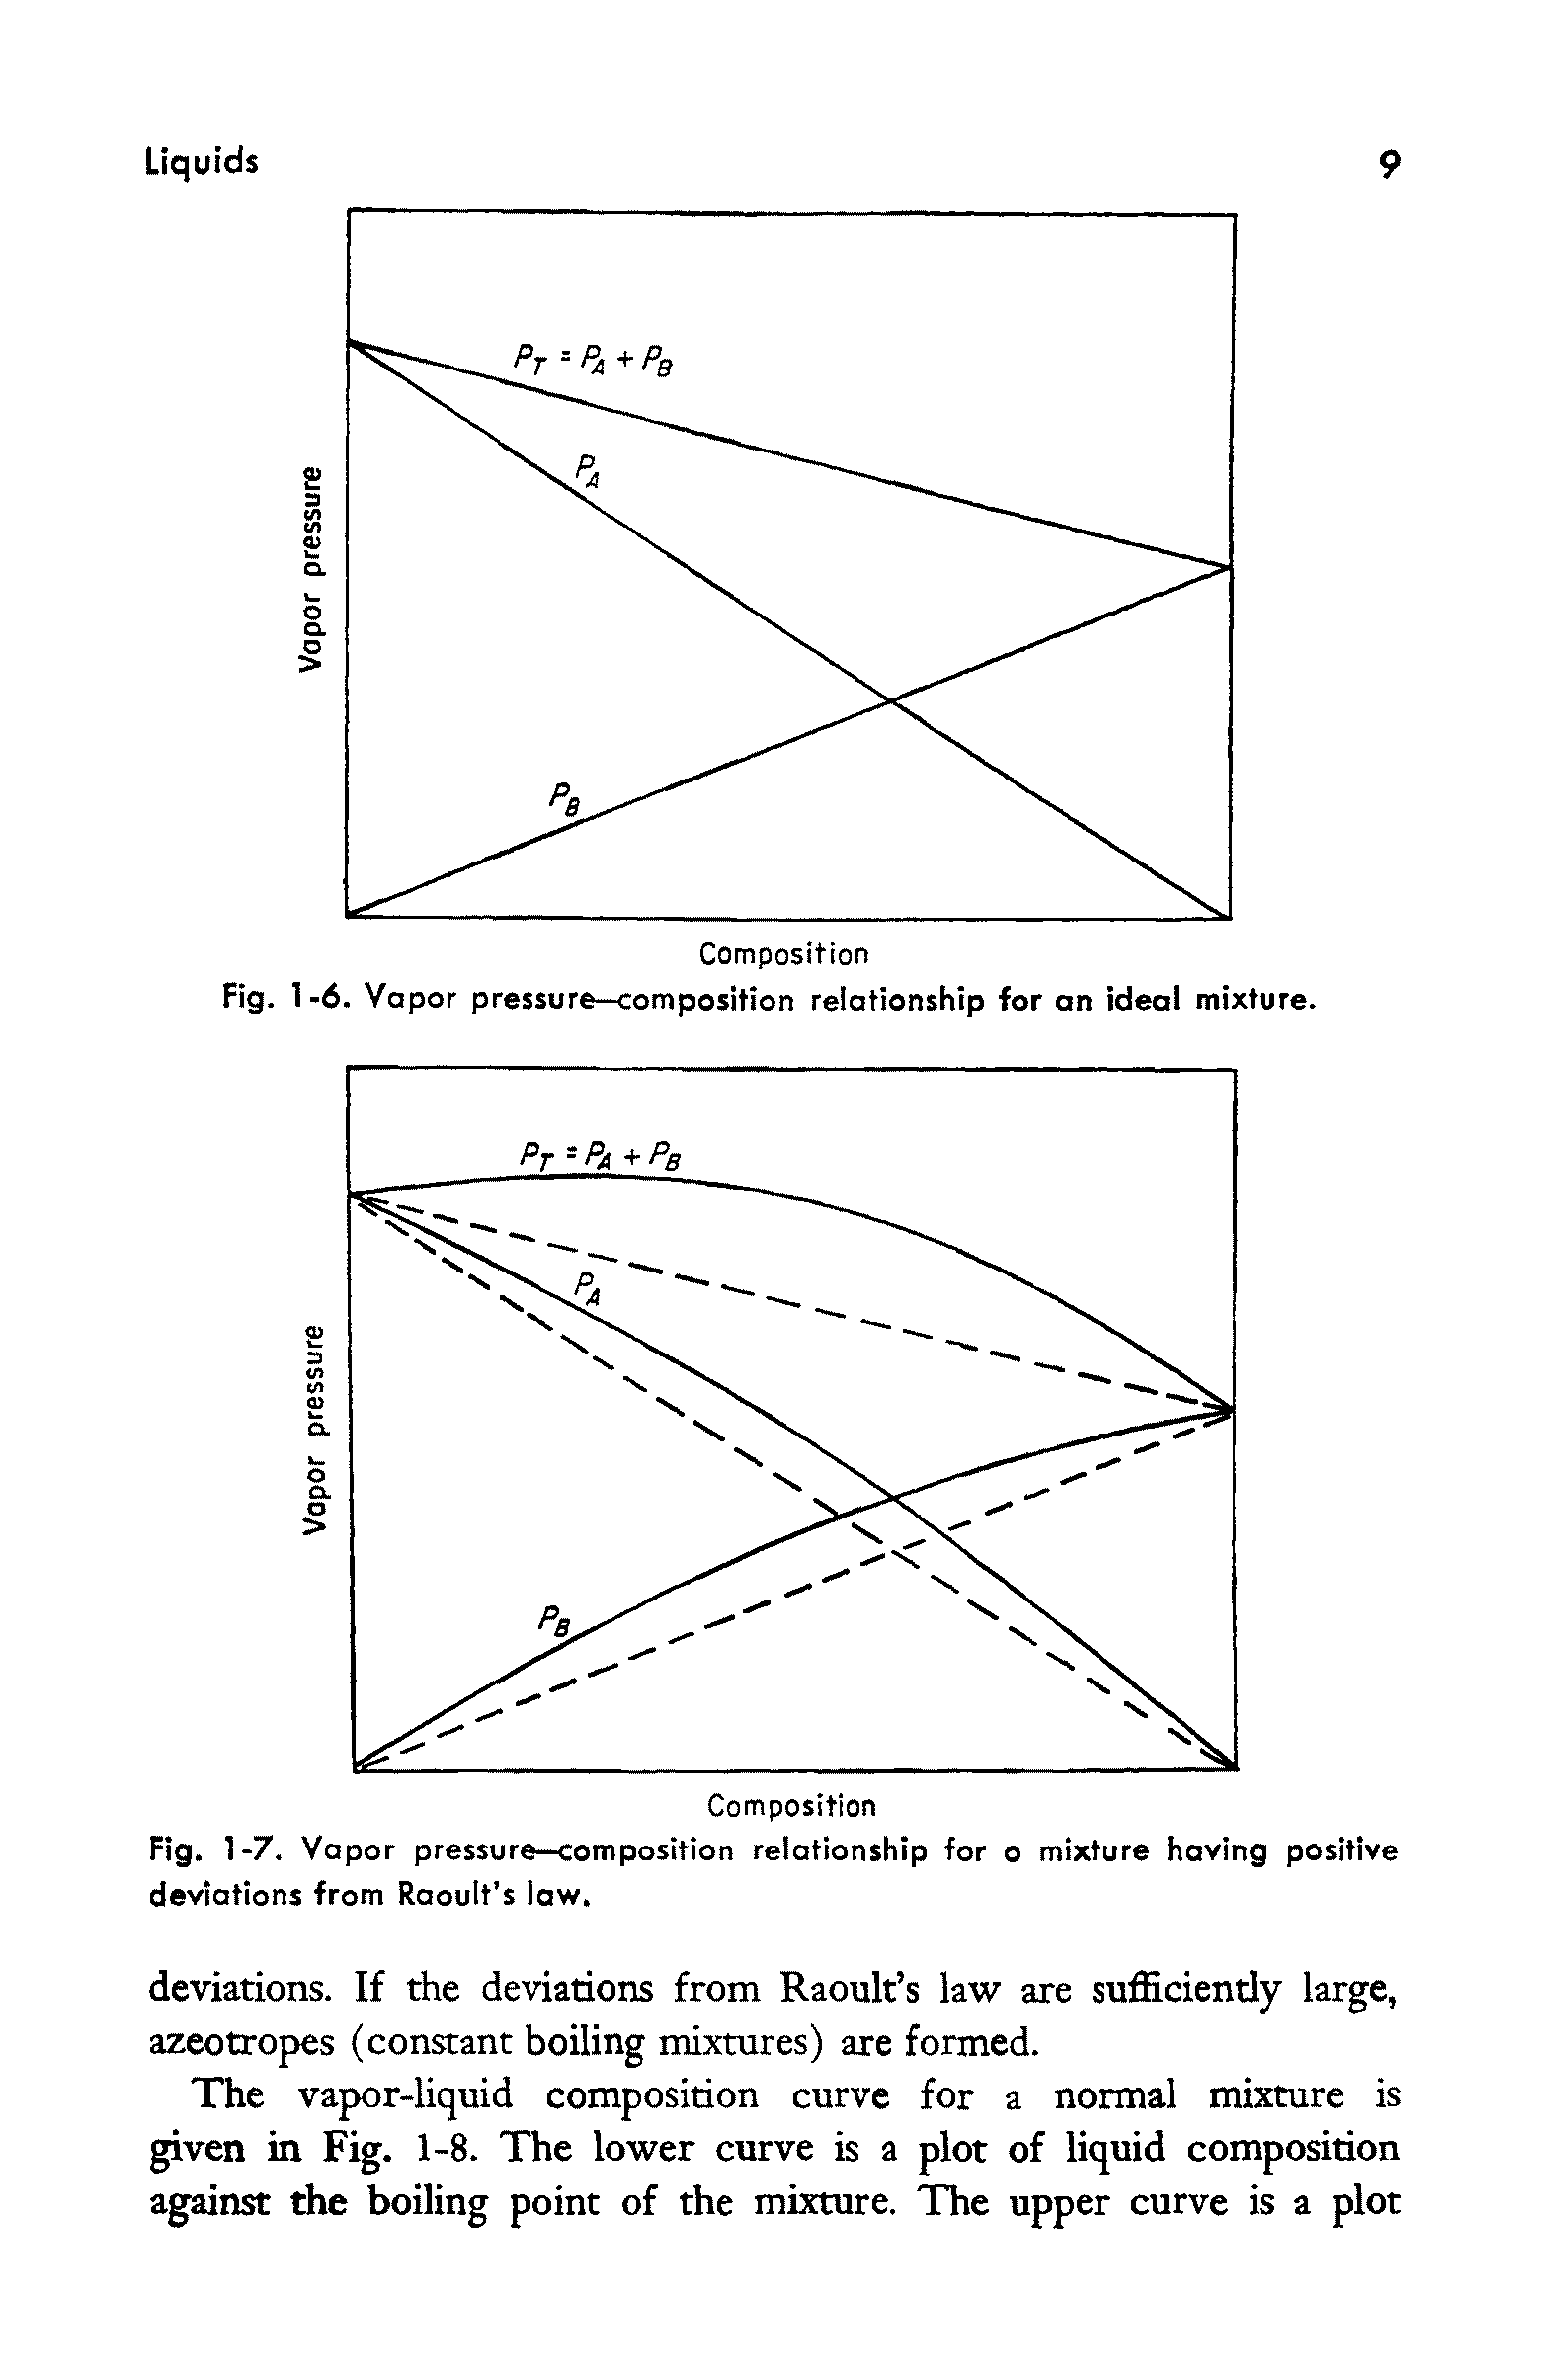 Fig. 1-7. Vapor pressure—composition relationship for o mixture having positive deviations from Raoult s law.